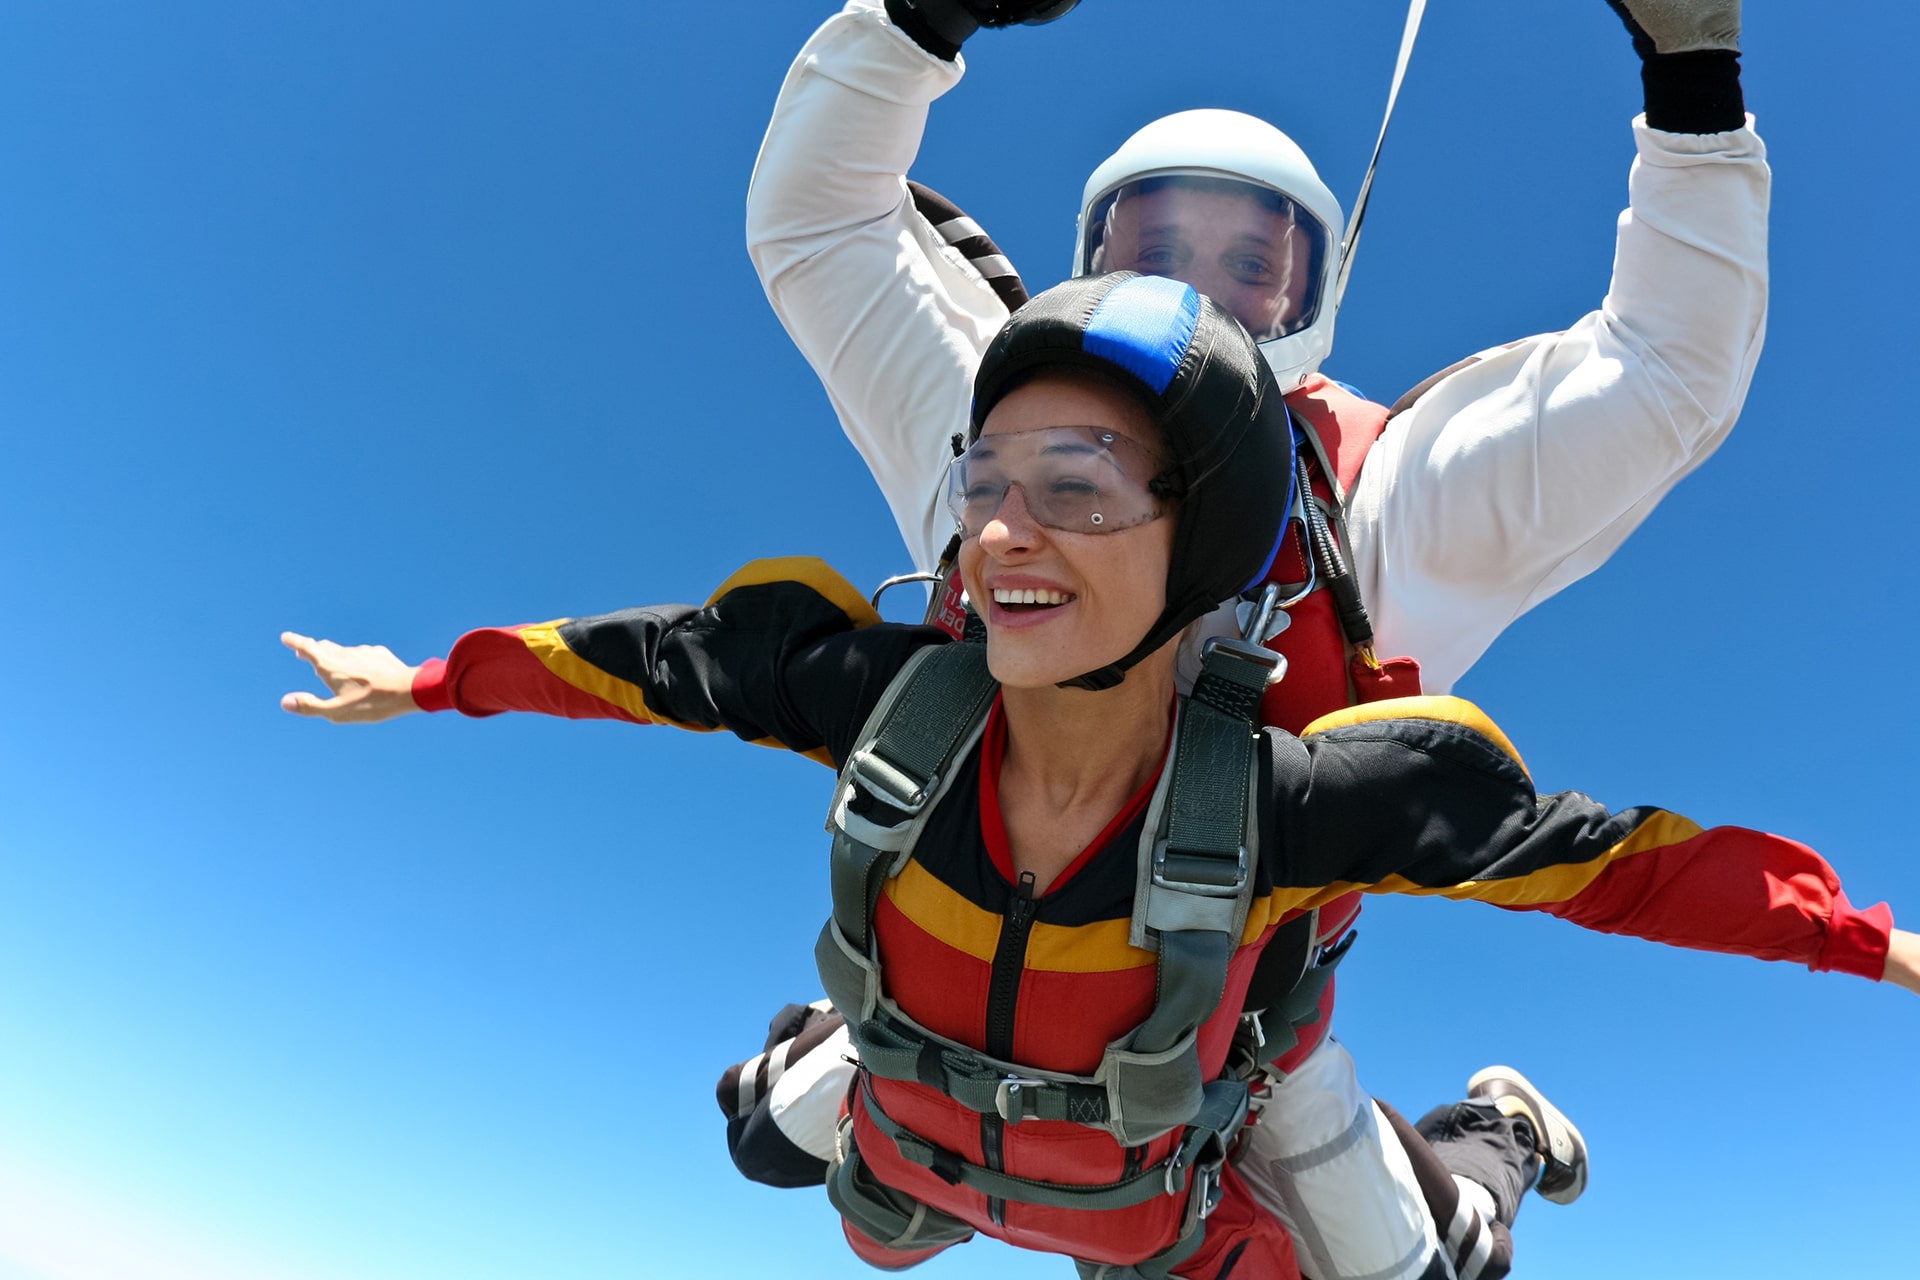 Skydiving Professional Class